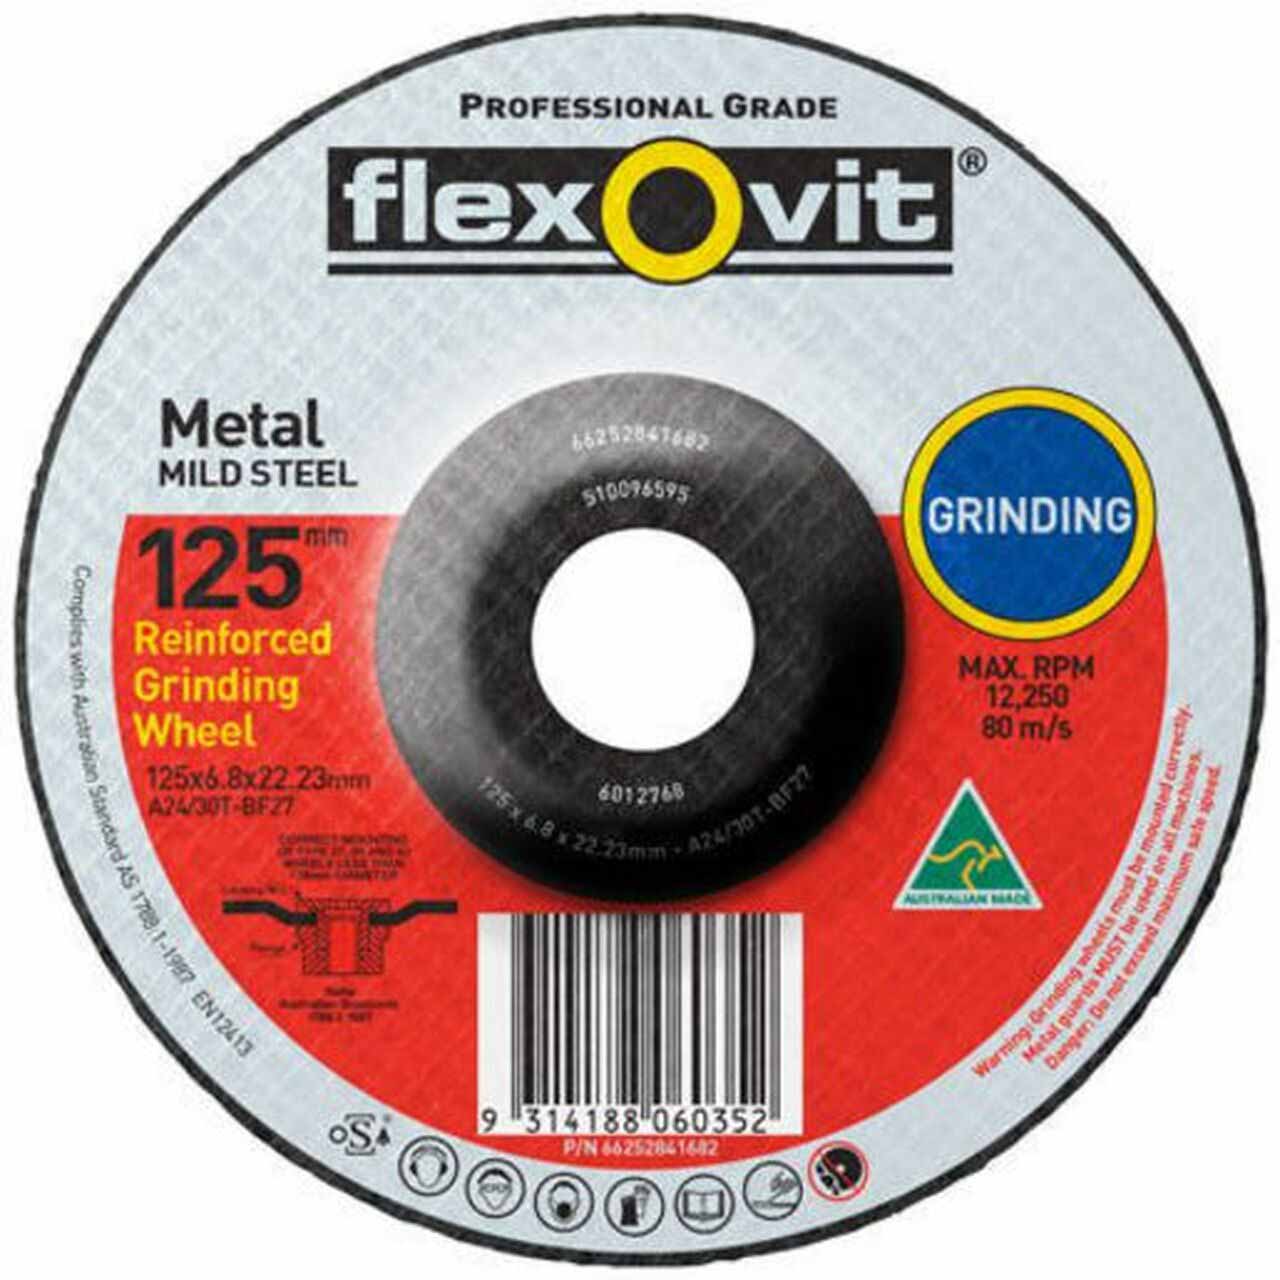 Grinding Wheel for Right Angle Grinder